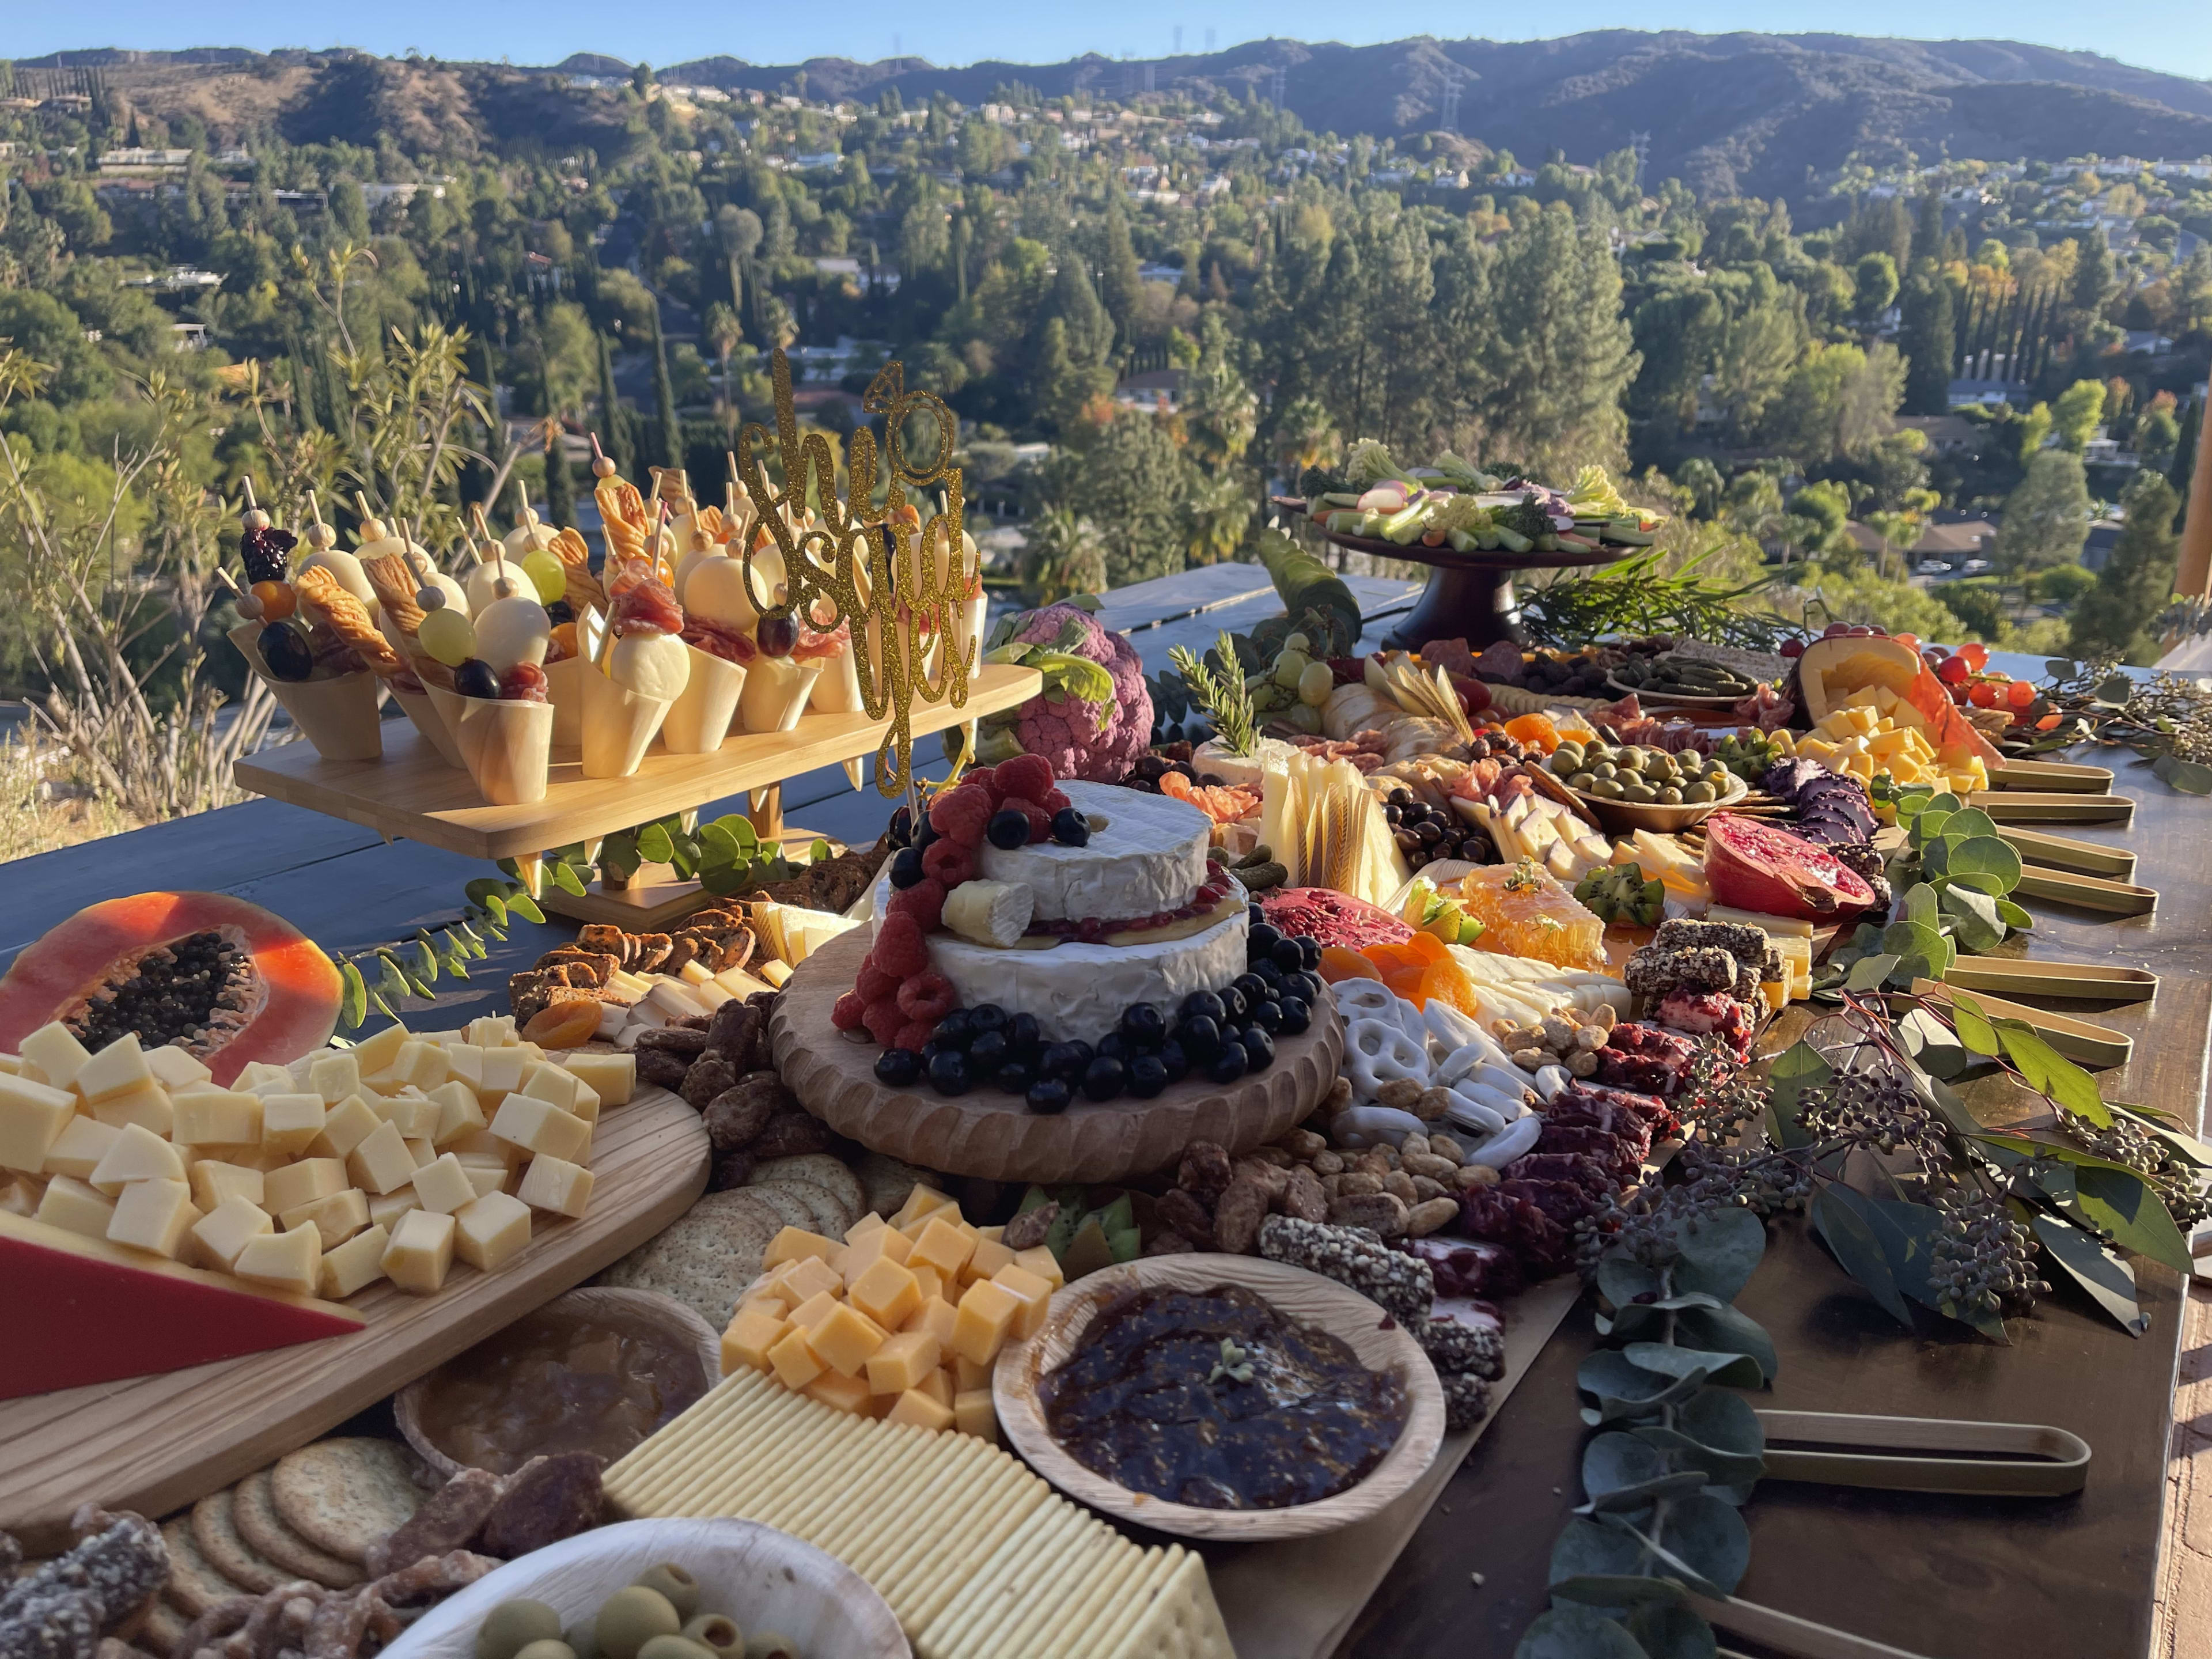 Assortment of cheeses and crackers displayed on a table at an outdoor engagement party.